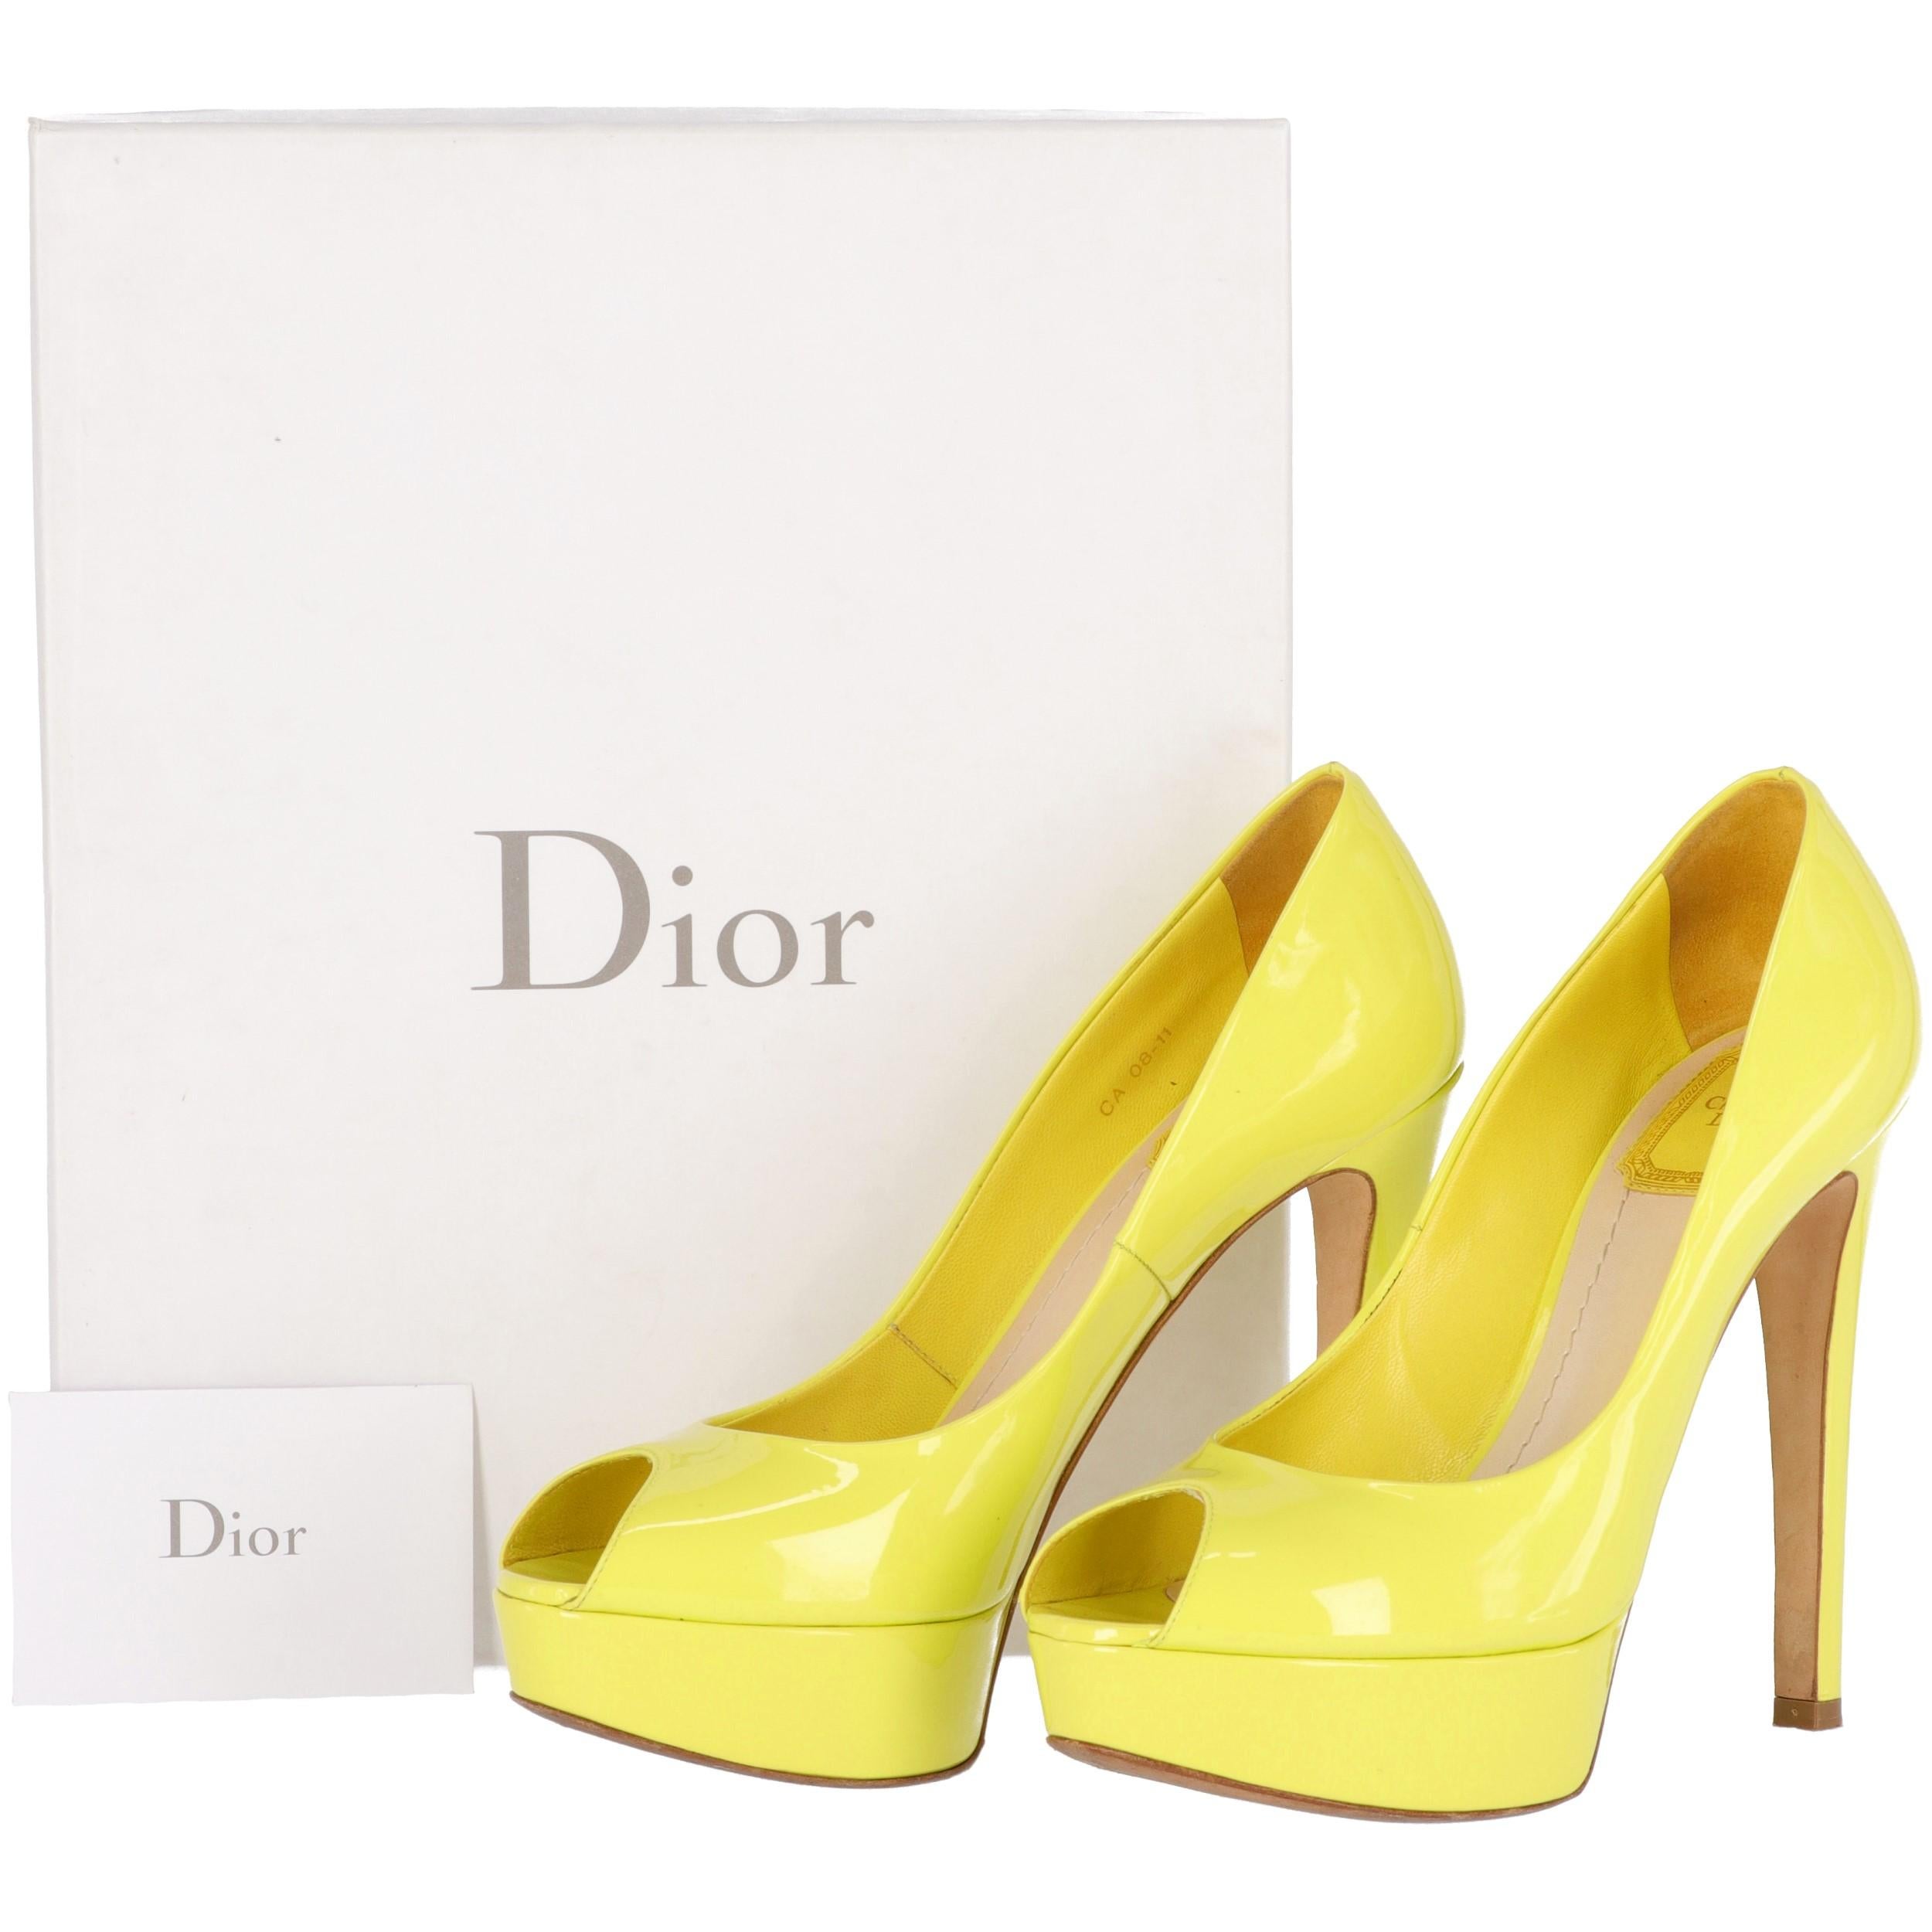 2000s Dior Yellow Lemon Patent Leather Heels Shoes 1